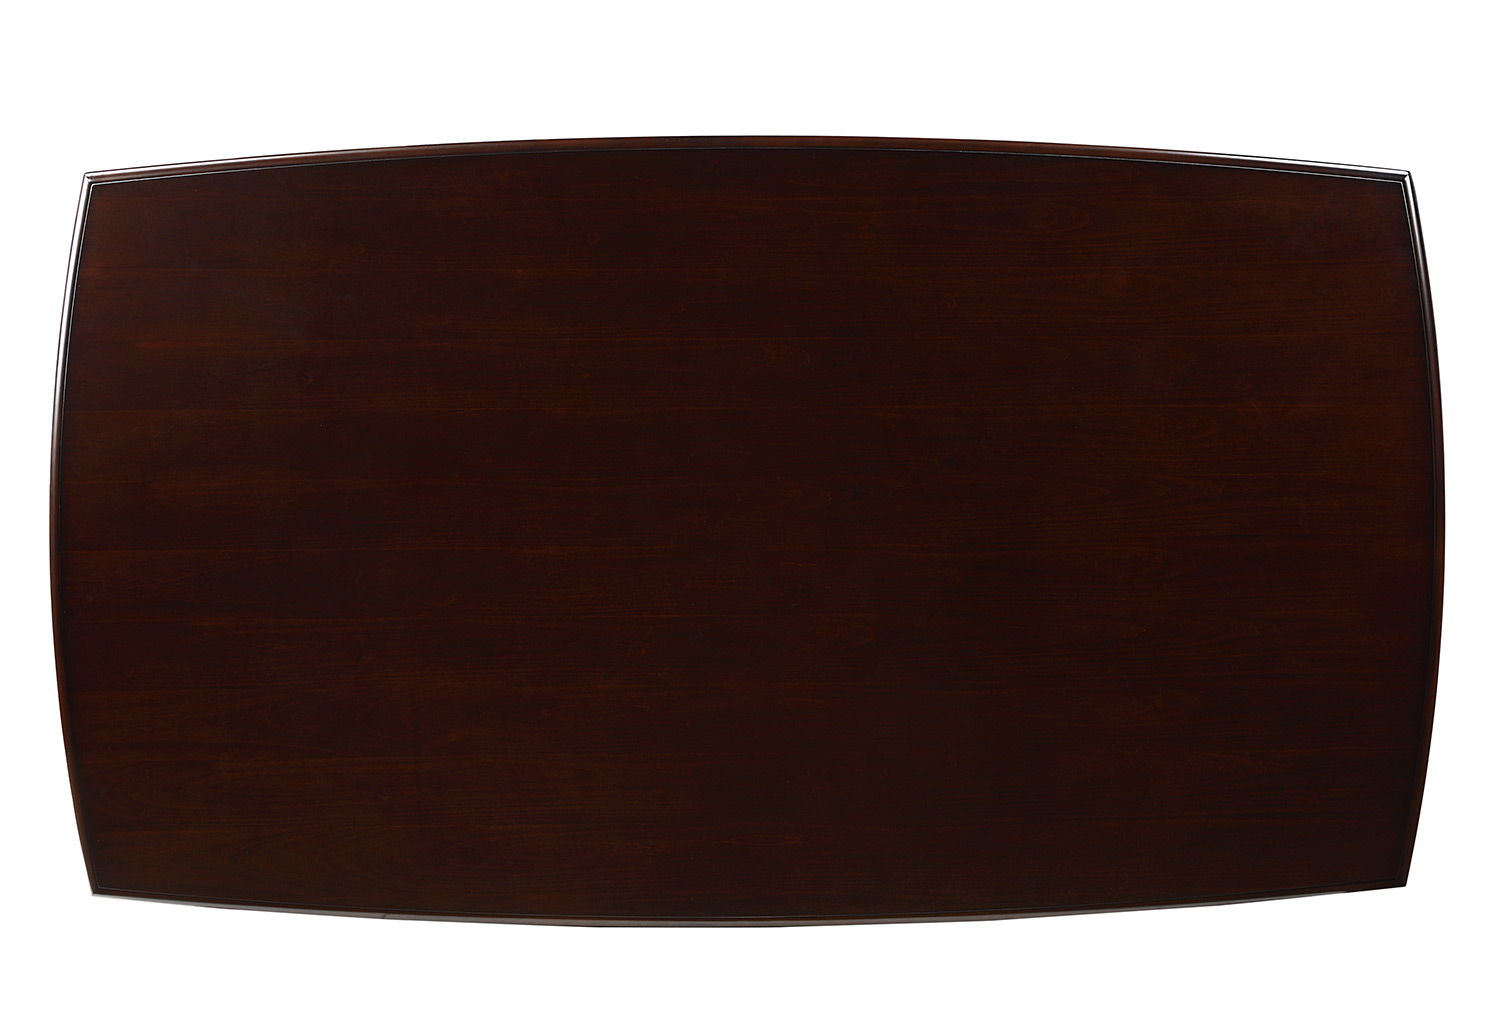 Homelegance Whitby Dining Table - Cherry